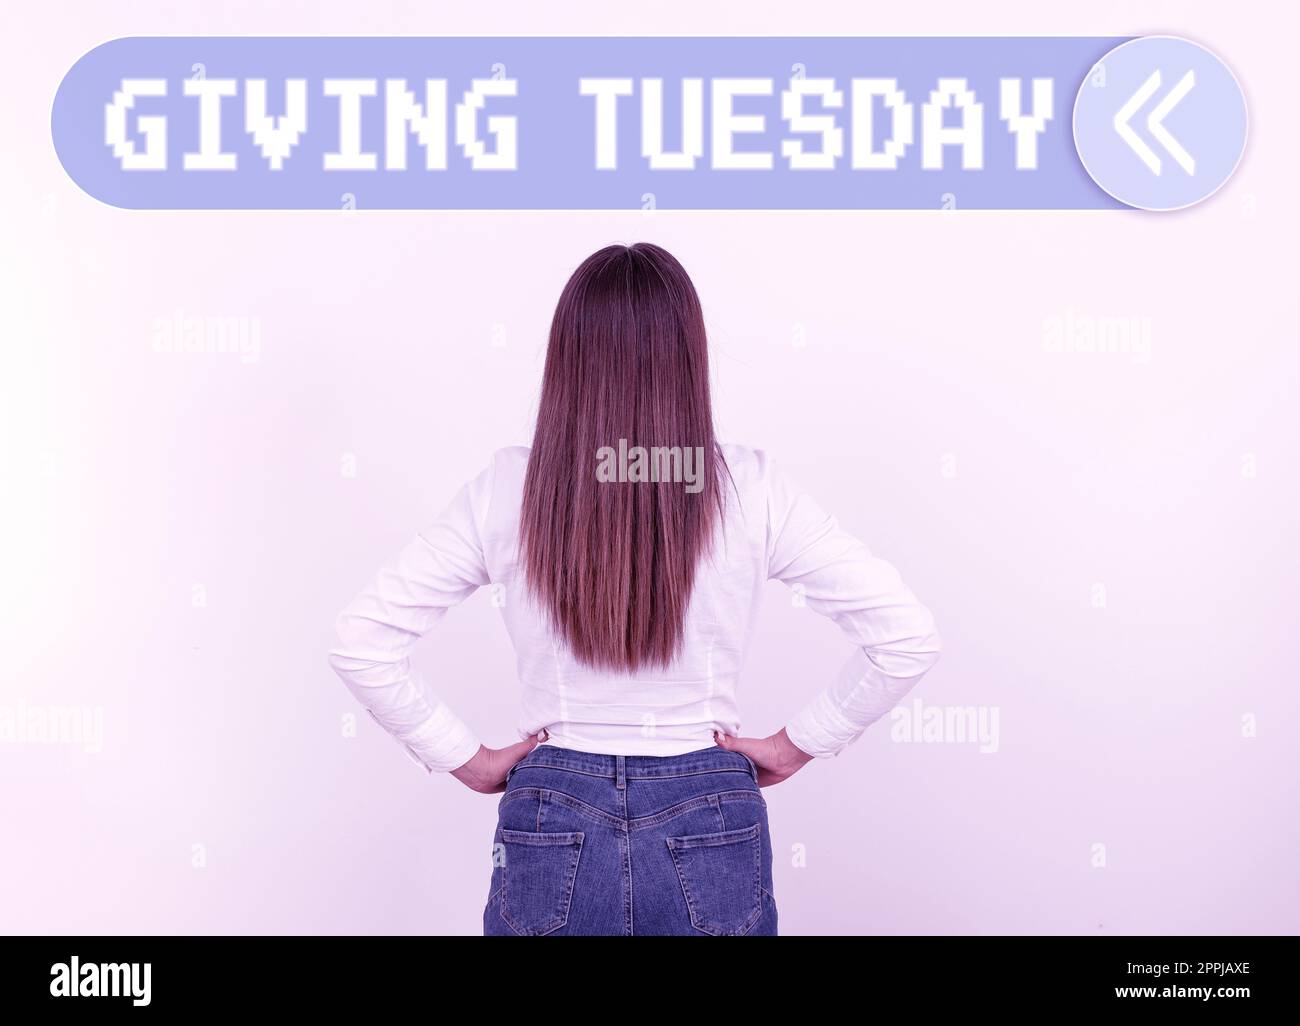 Text sign showing Giving Tuesday. Business concept international day of charitable giving Hashtag activism Stock Photo